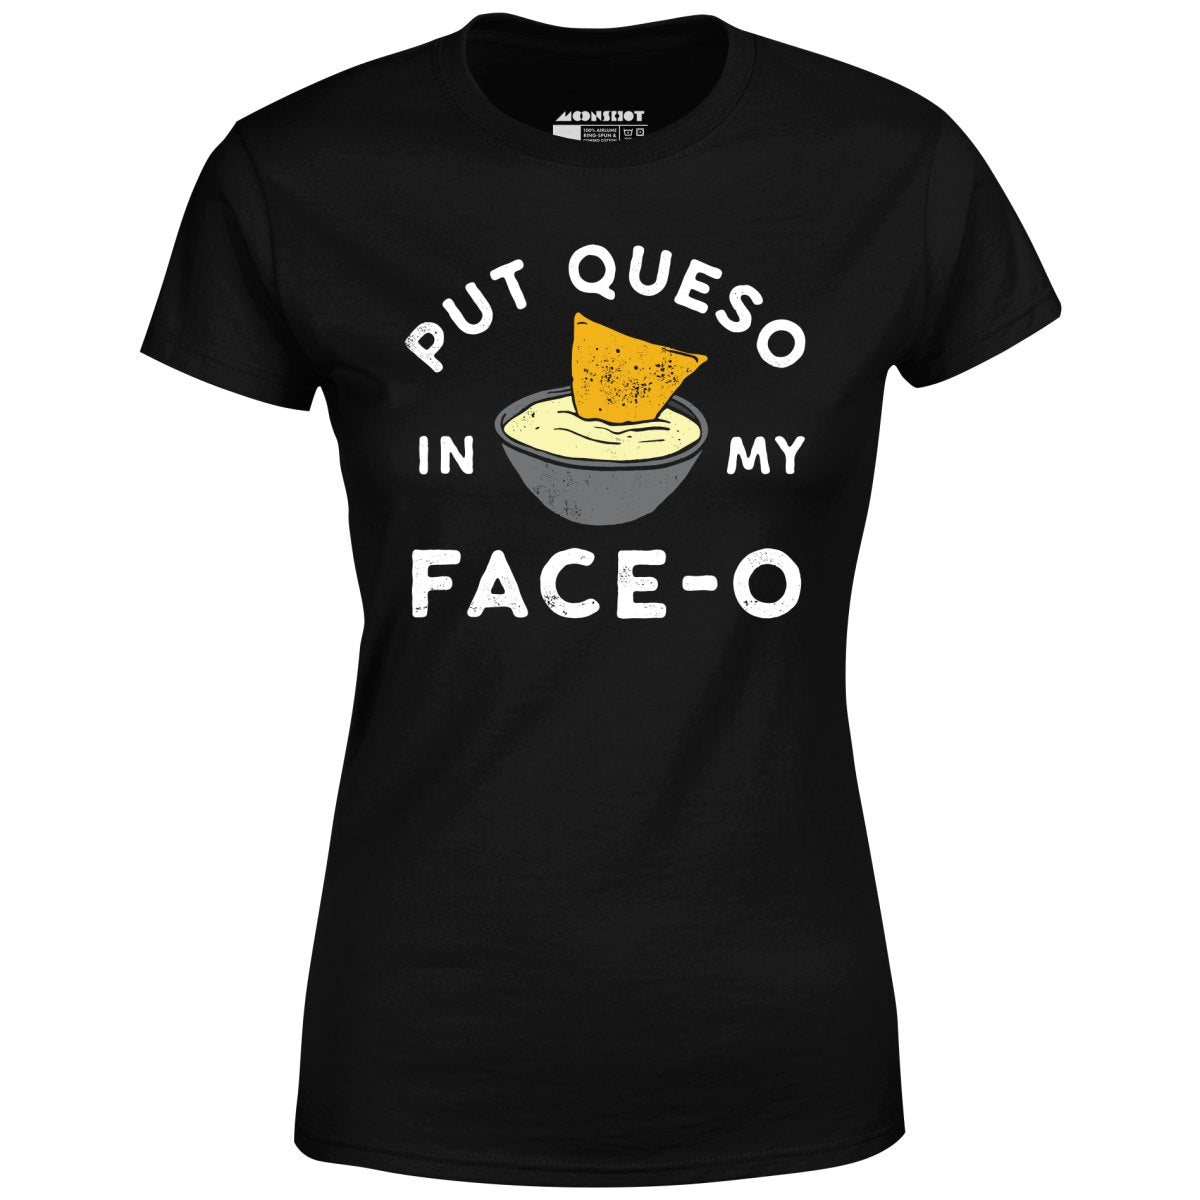 Put Queso in My Face-O - Women's T-Shirt